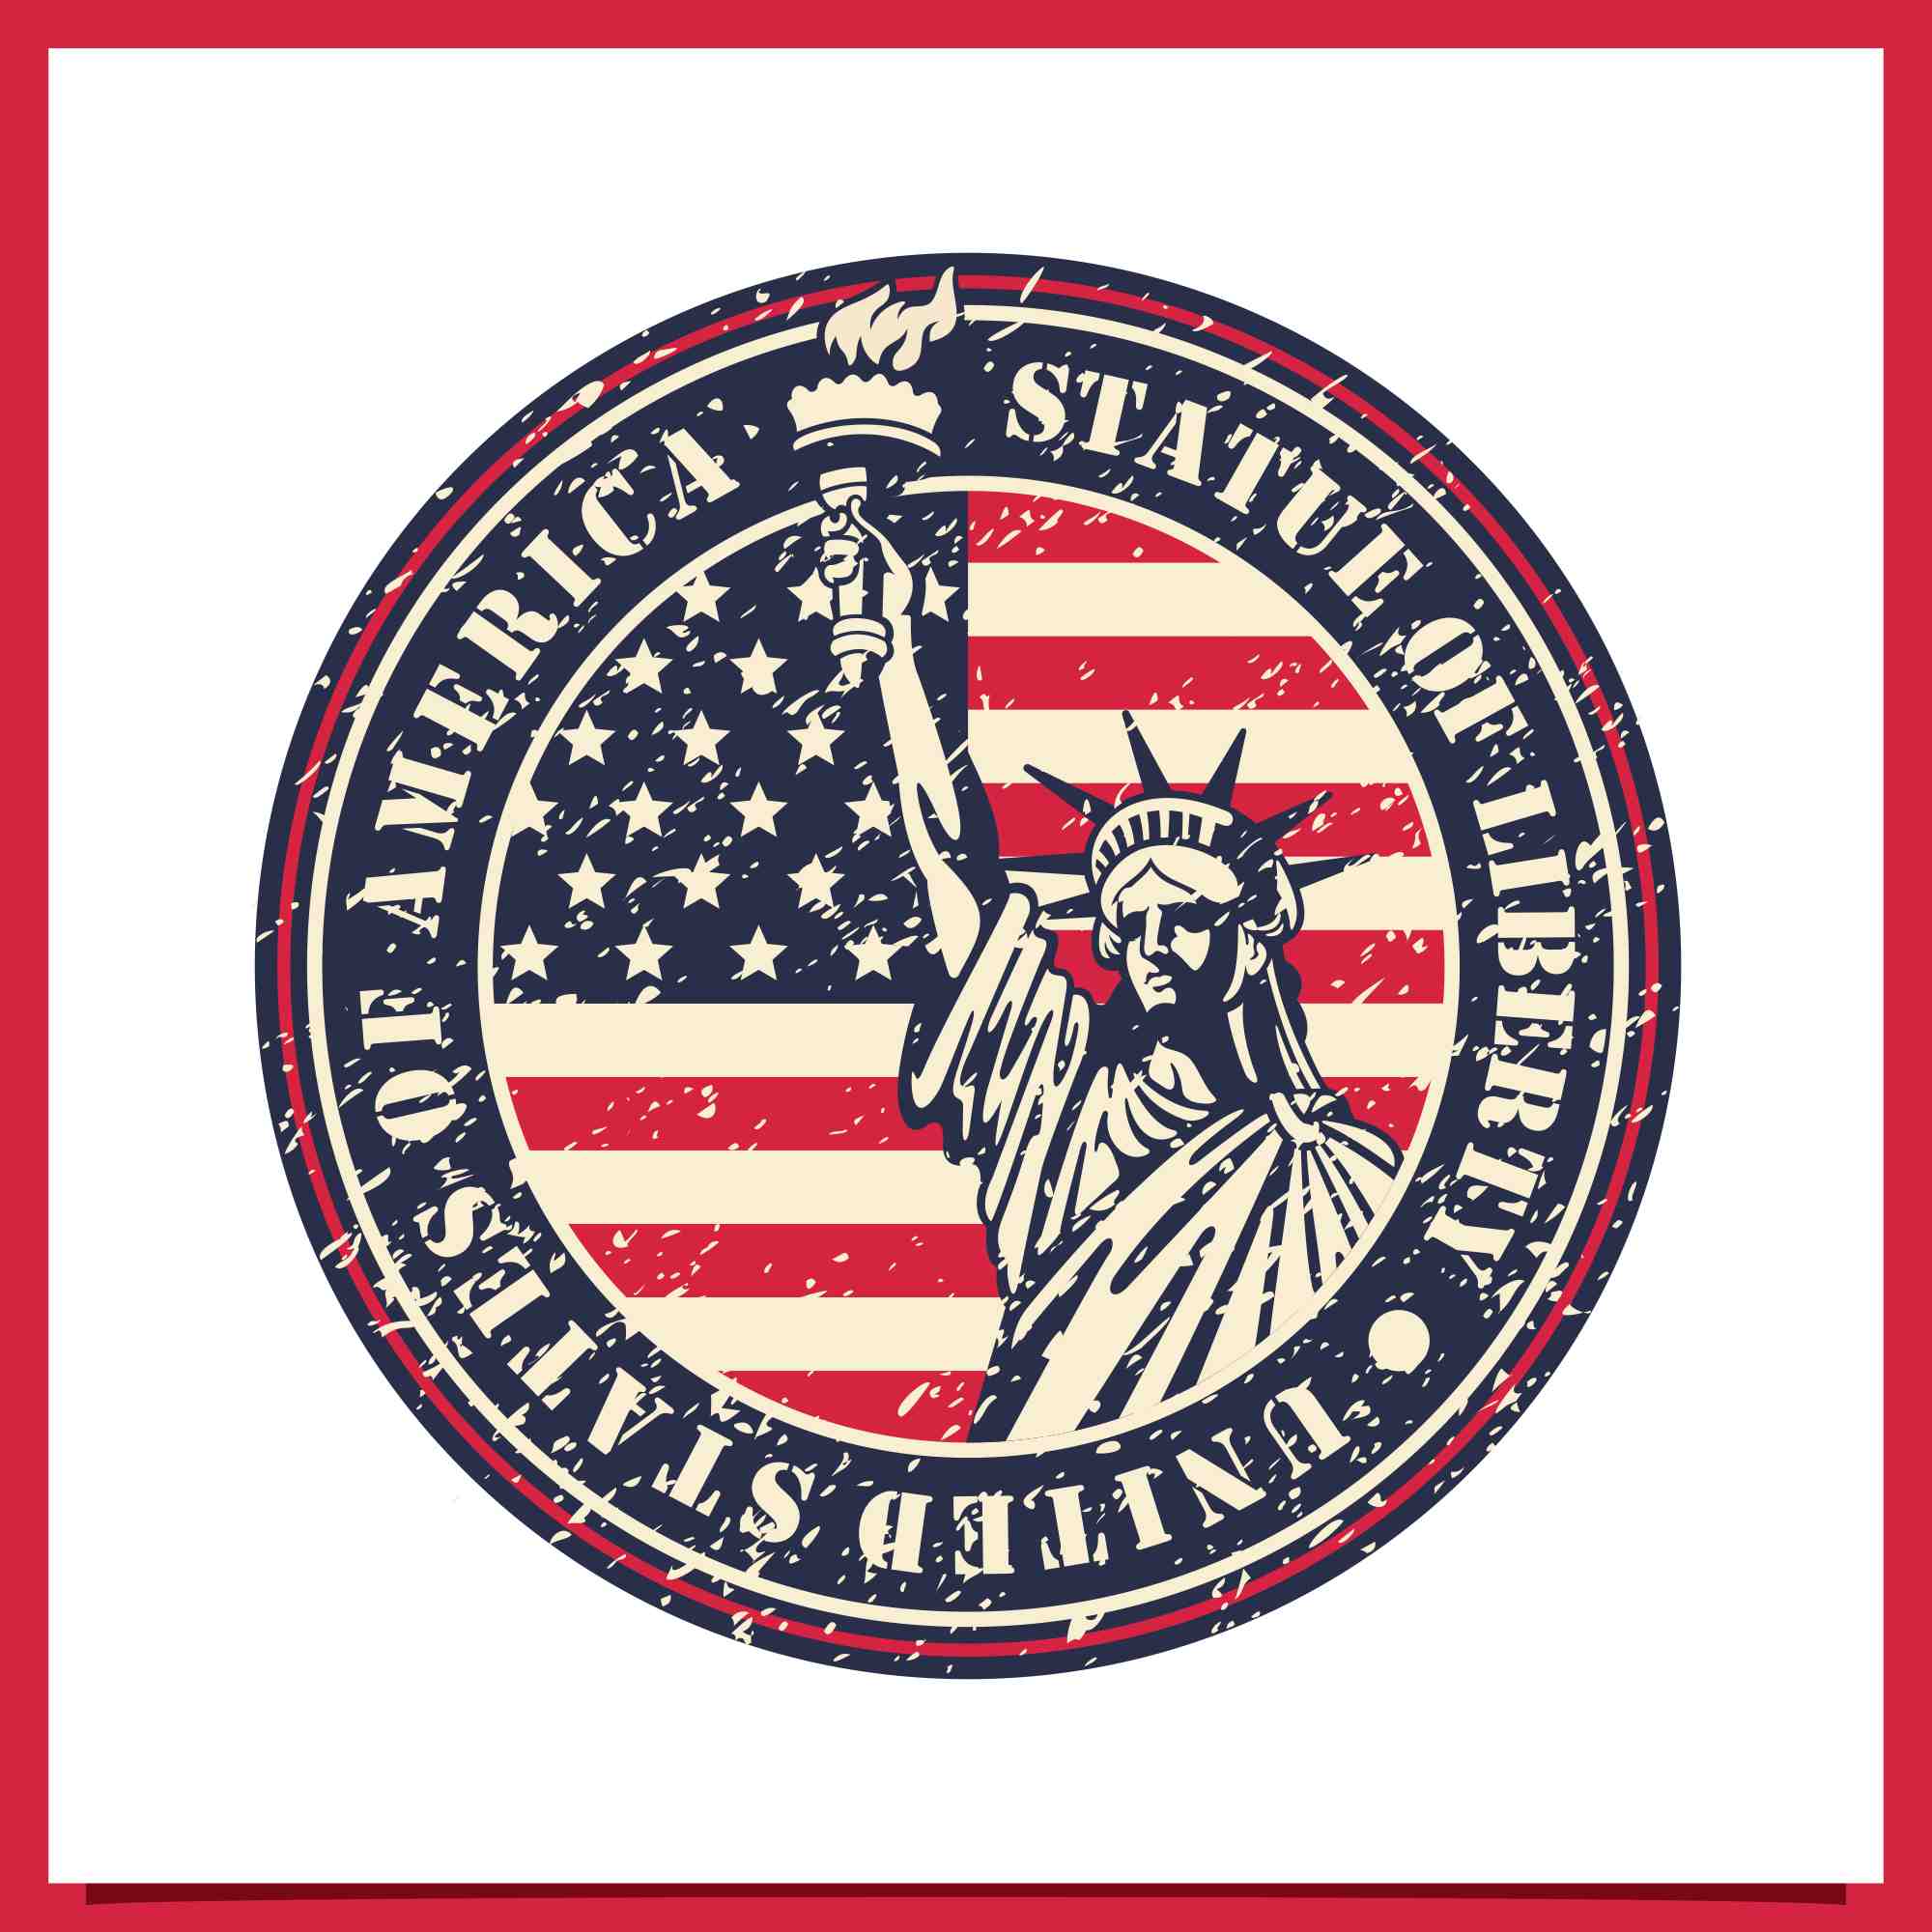 Statue of Liberty united states of america design - $4 preview image.